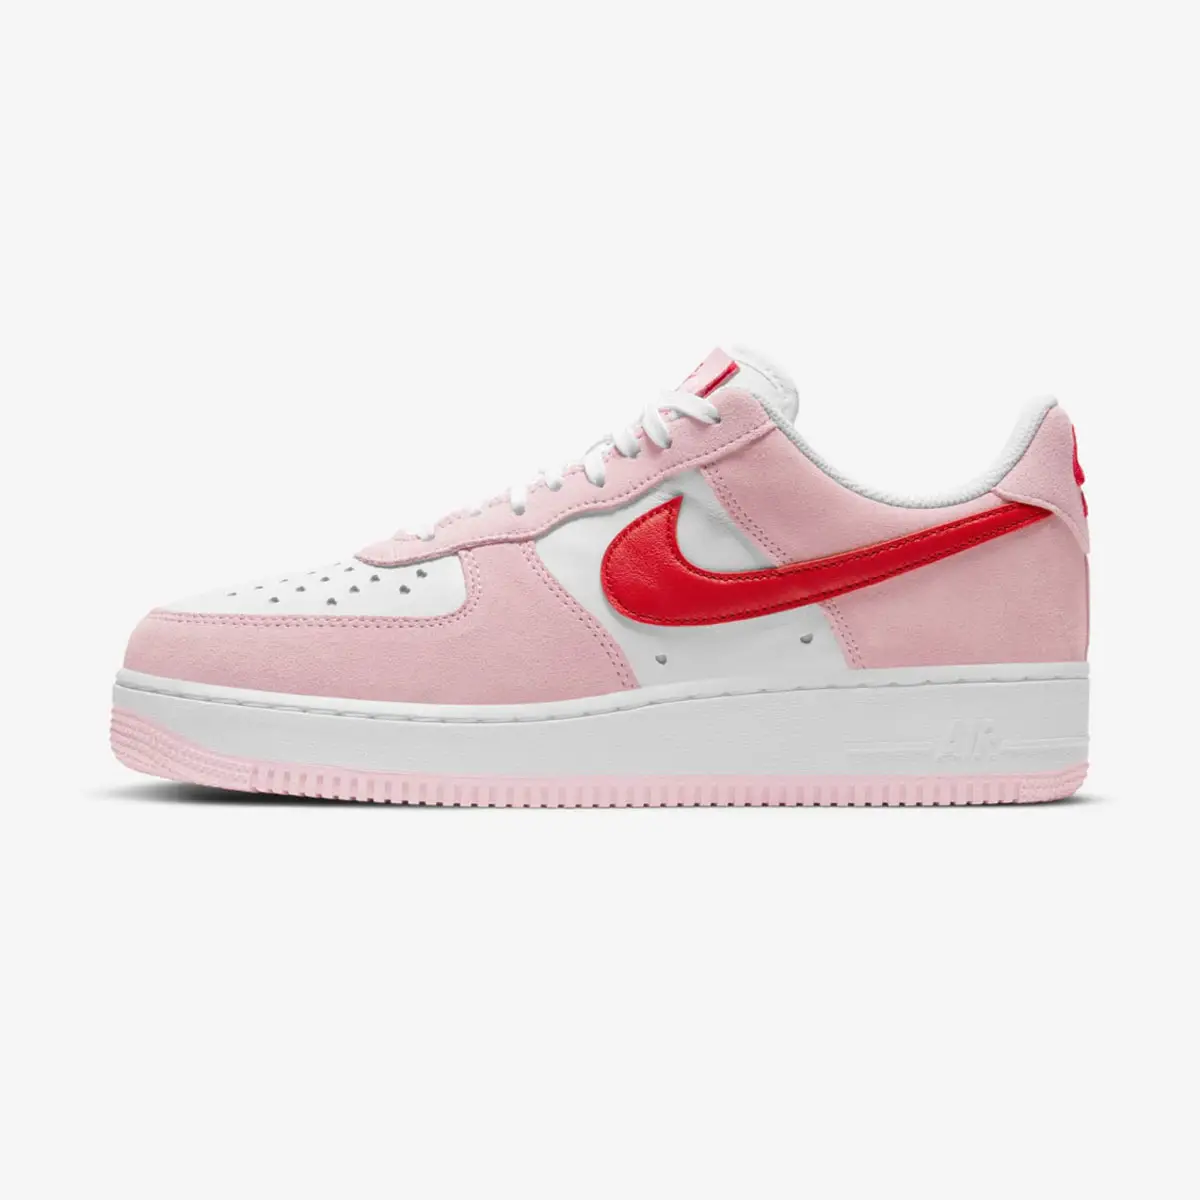 Nike valentines day sneakers air force 1